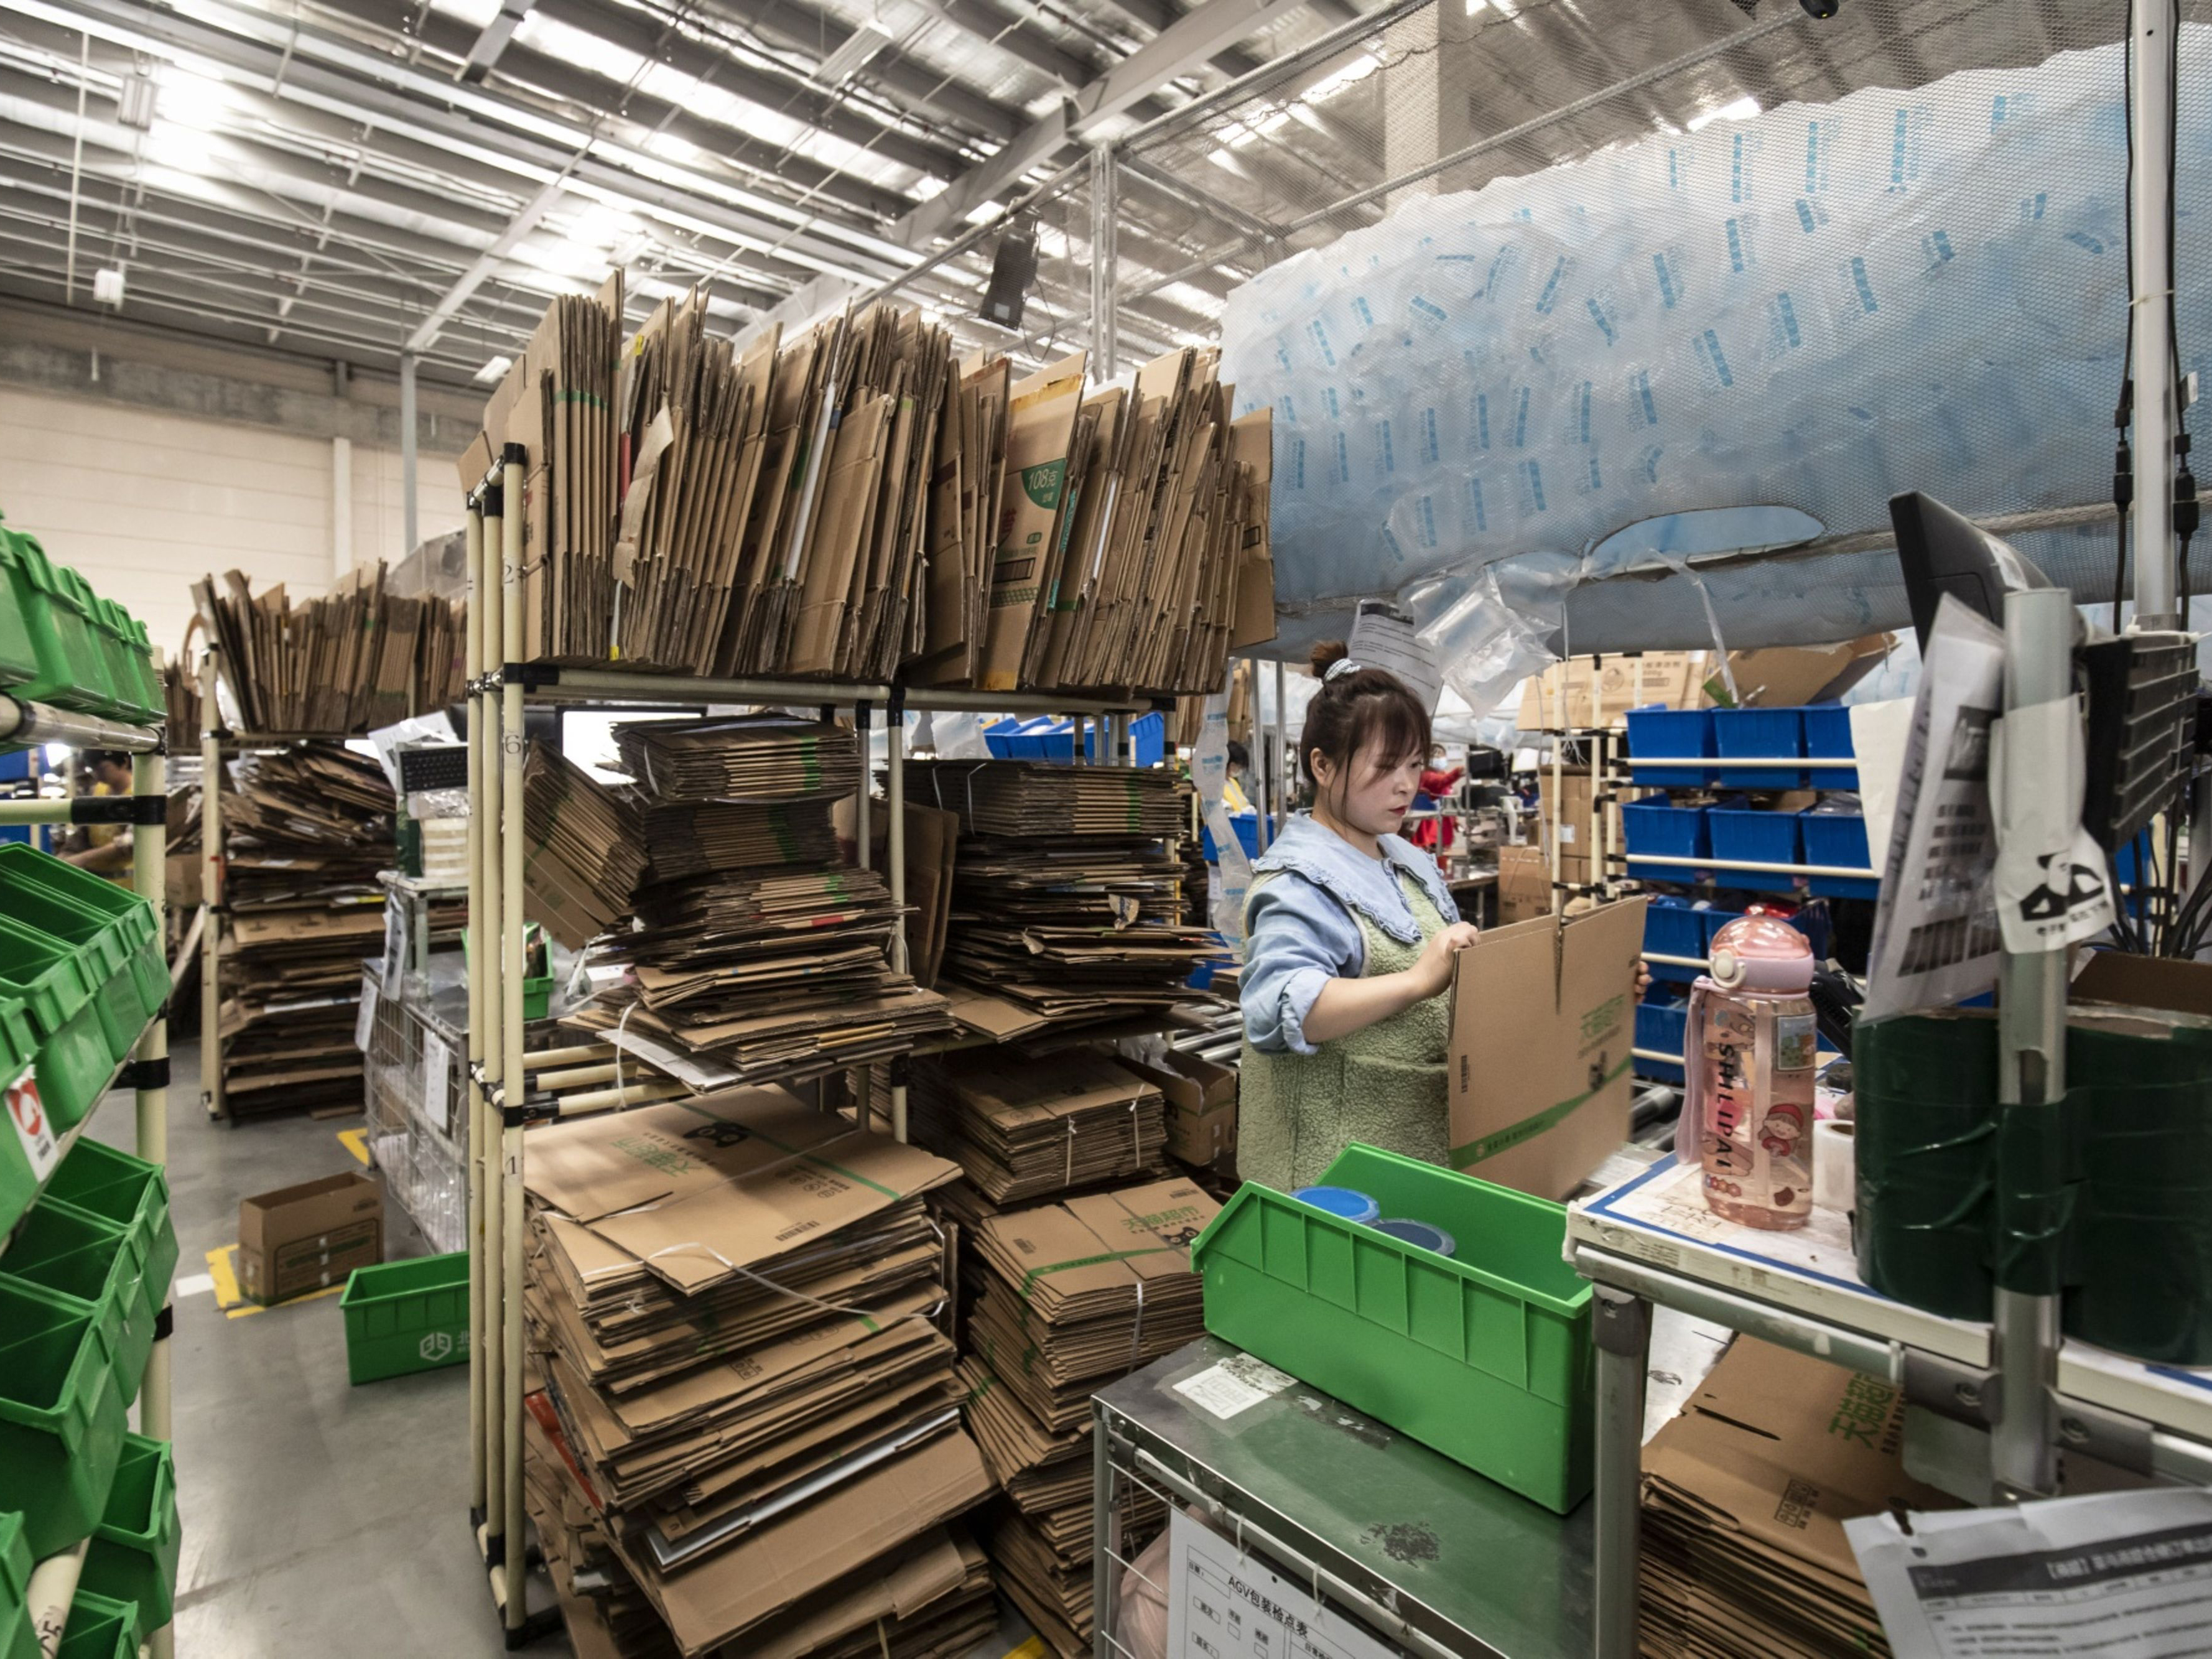 China’s Online Shopping Addiction Is Killing Its Green Packaging Drive